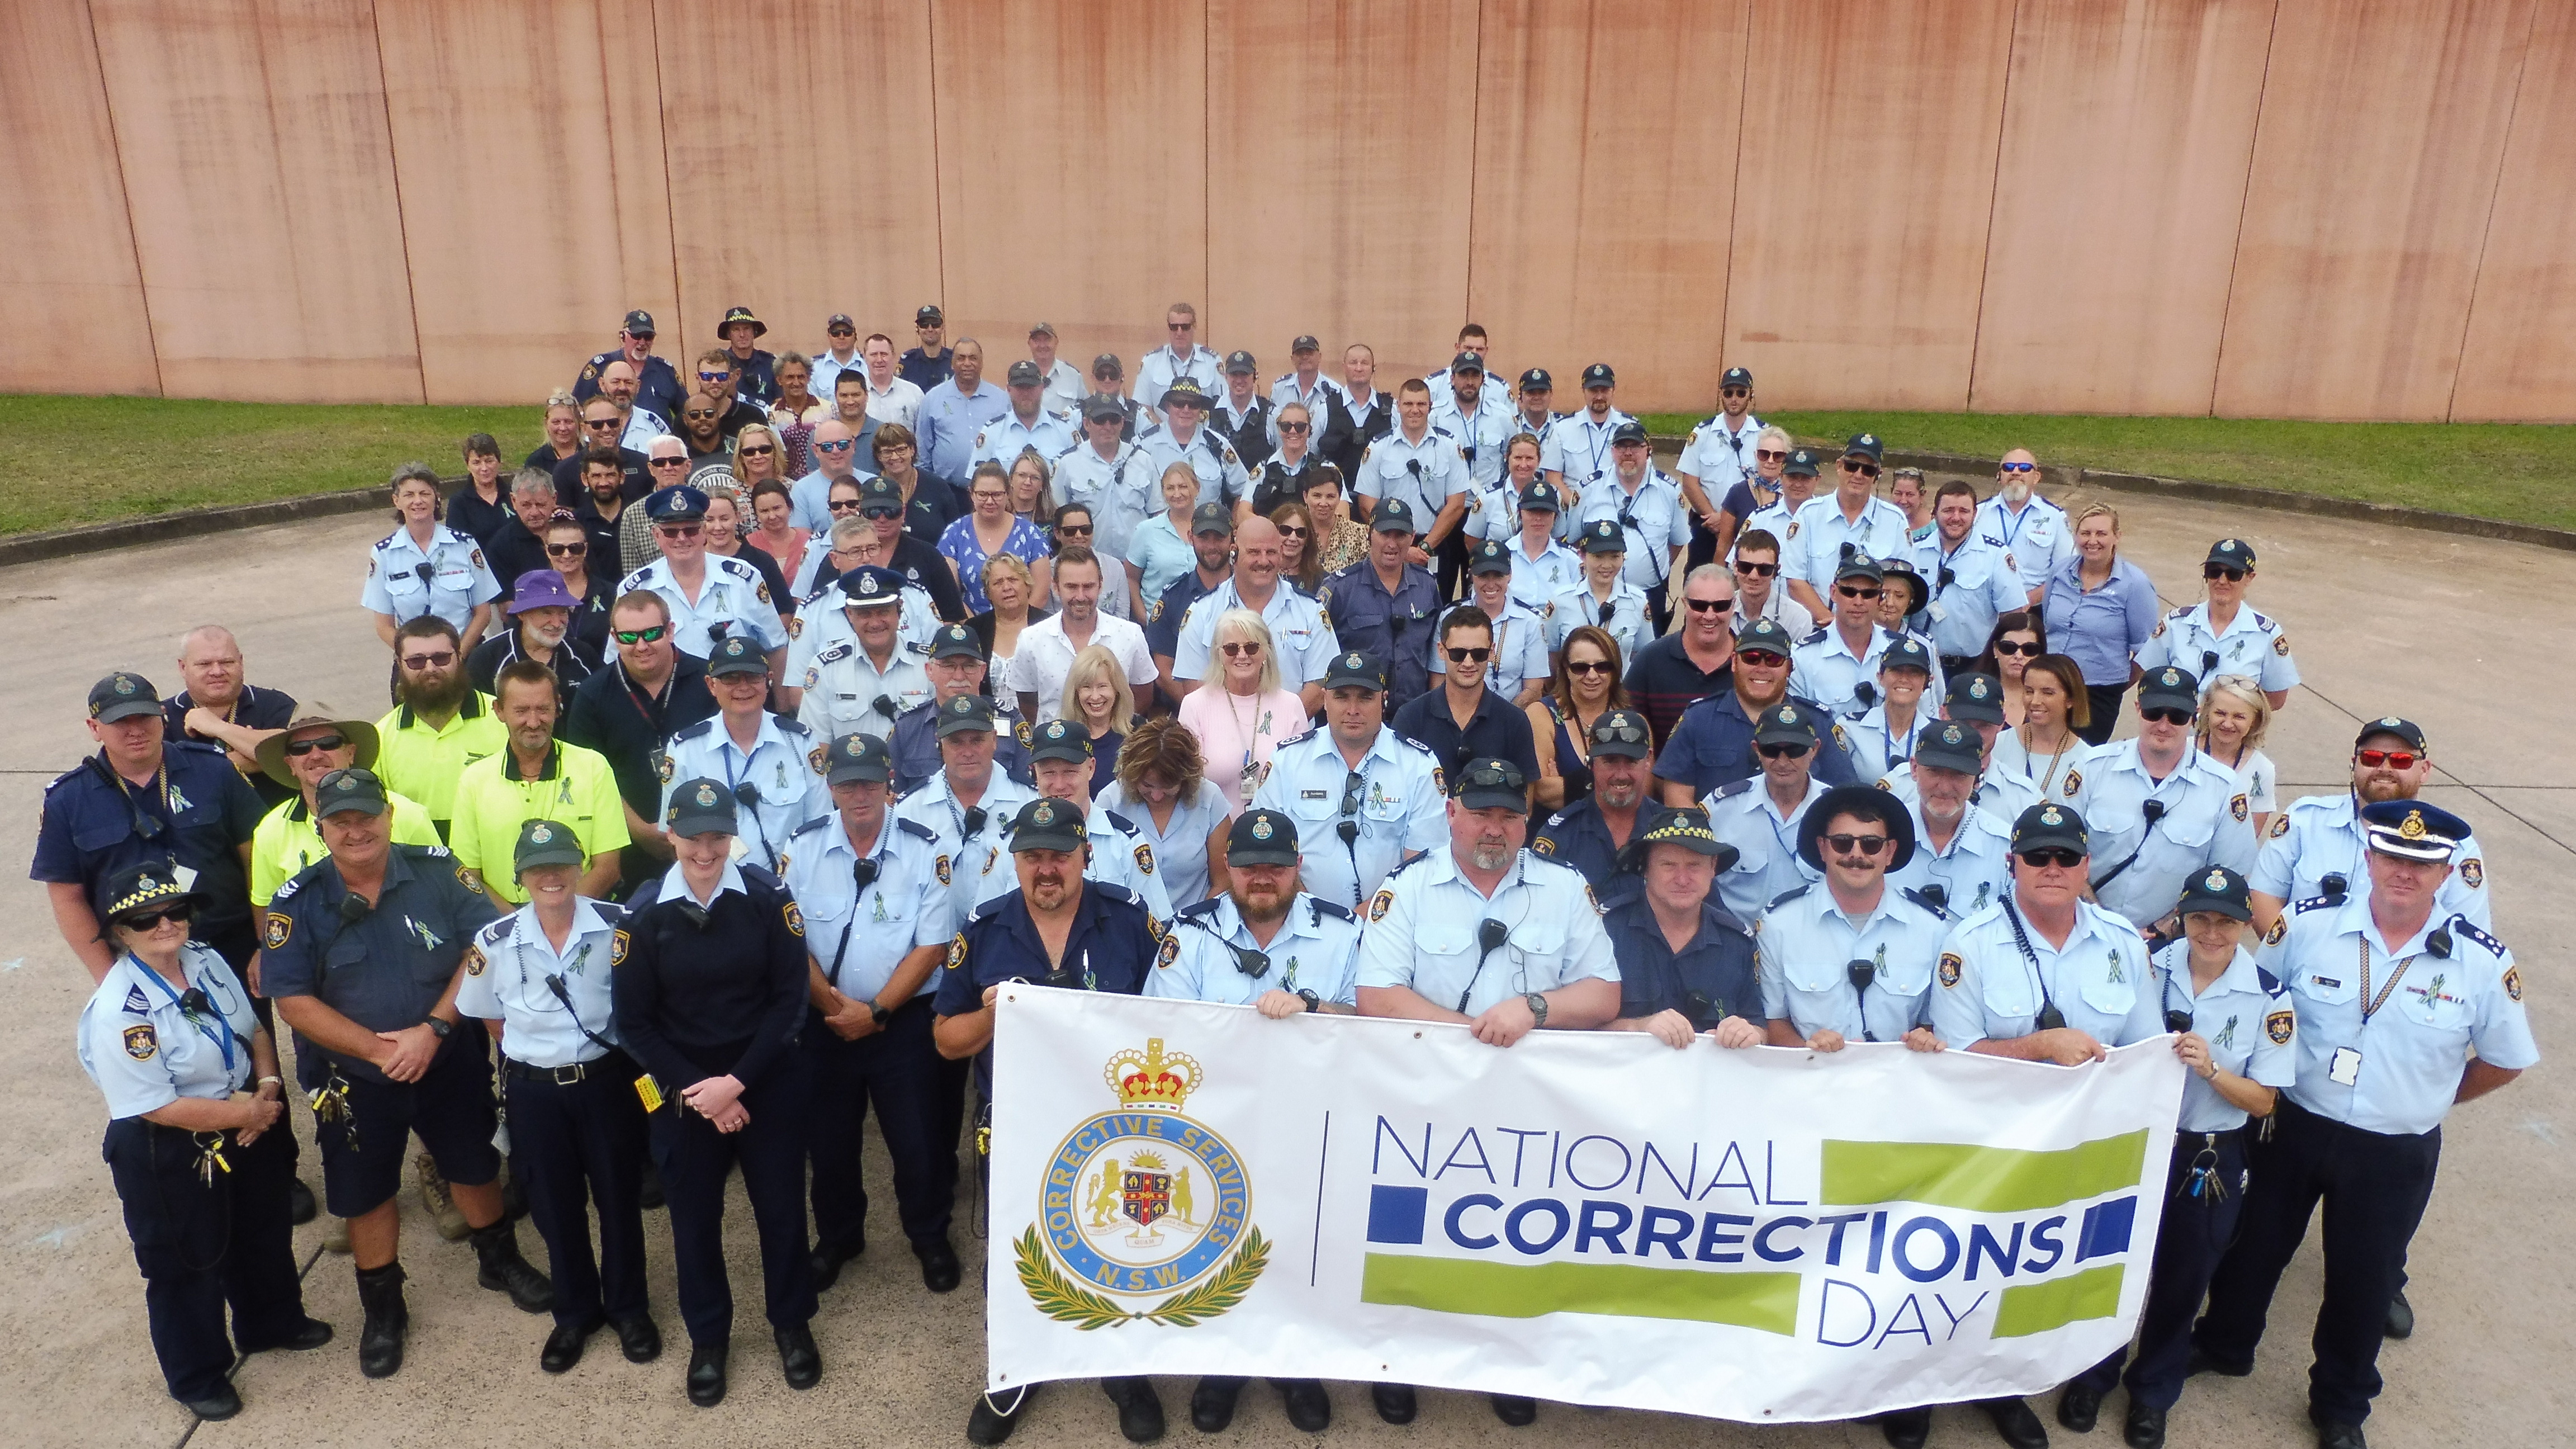 Staff from Mid North Coast Correctional Centre celebrate National Corrections Day